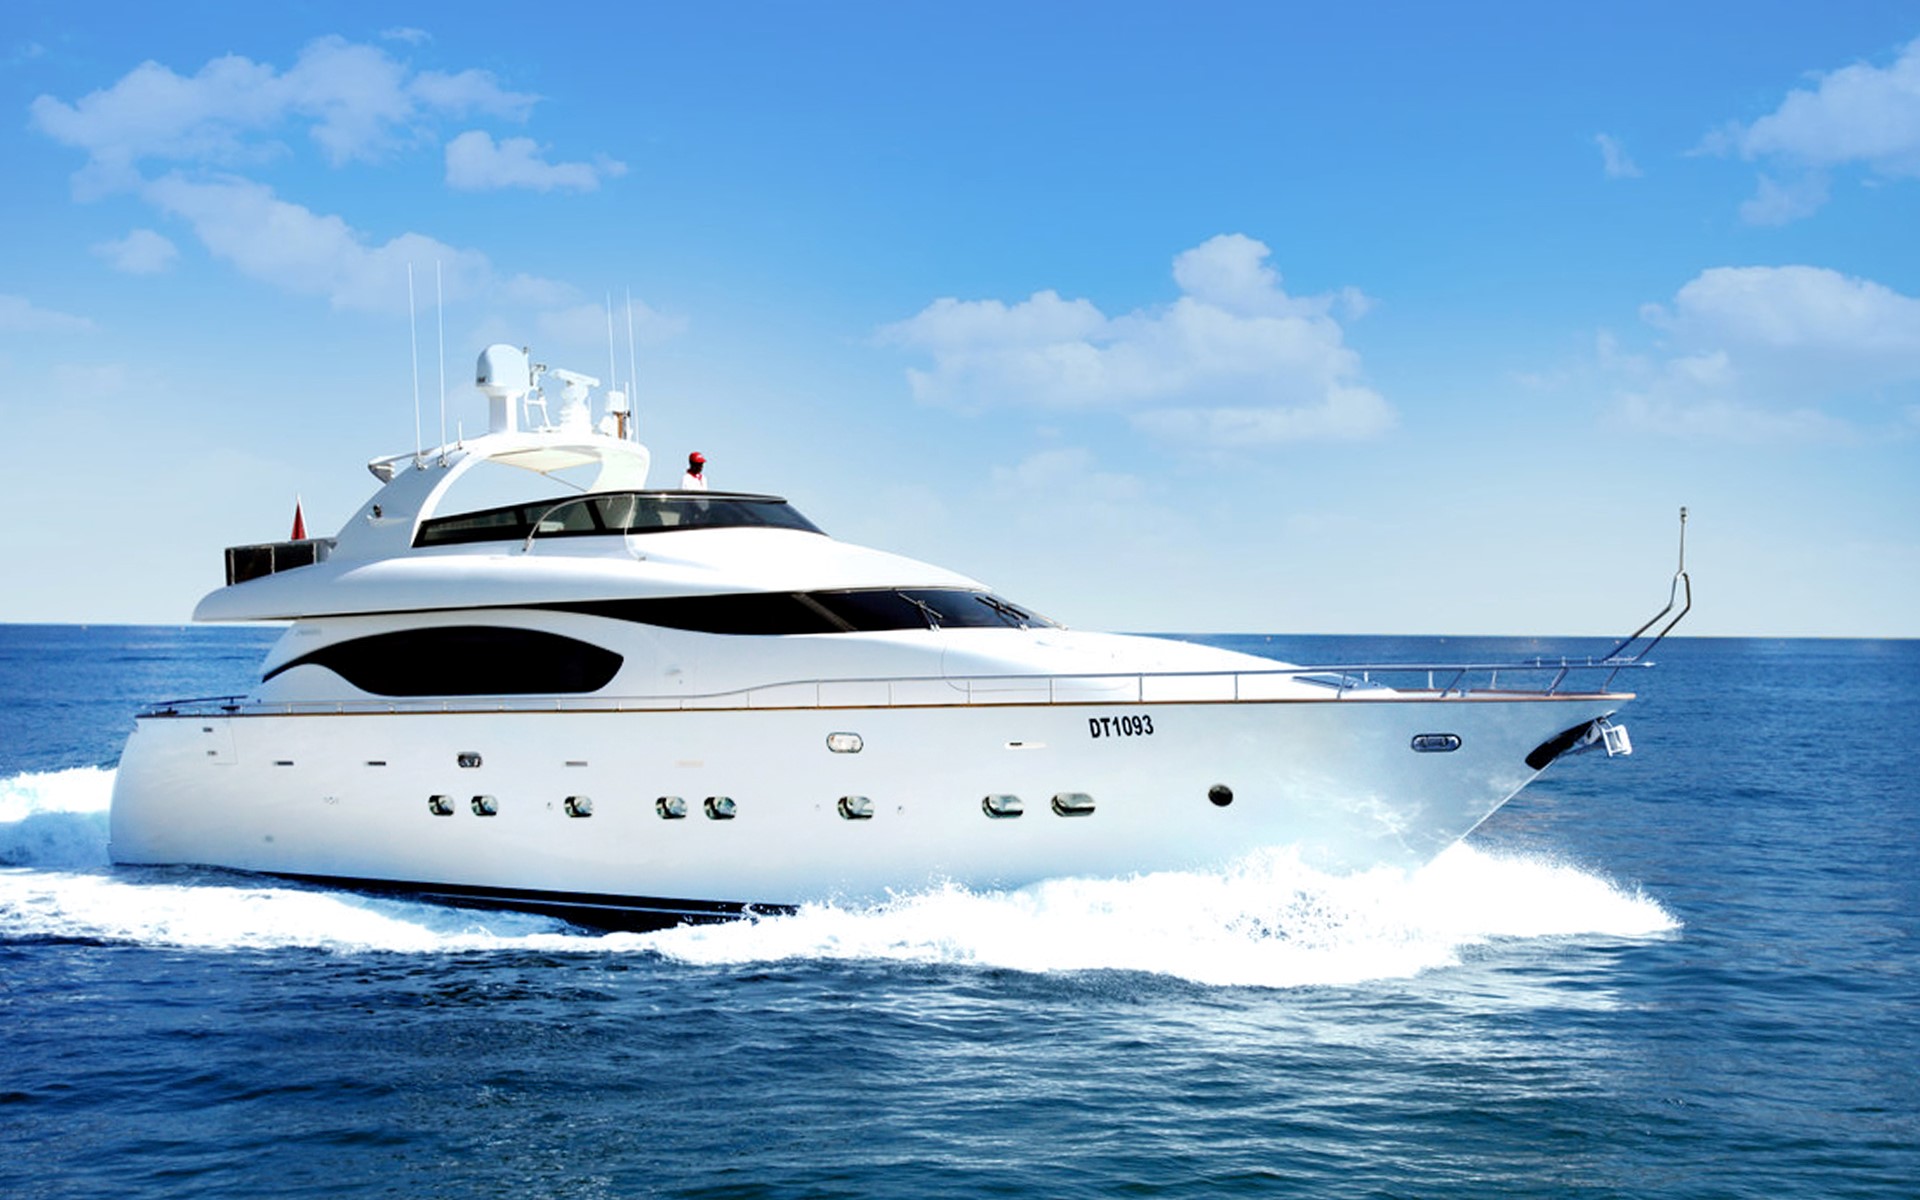 78ft yacht on waters of dubai - yachts for rent in dubai